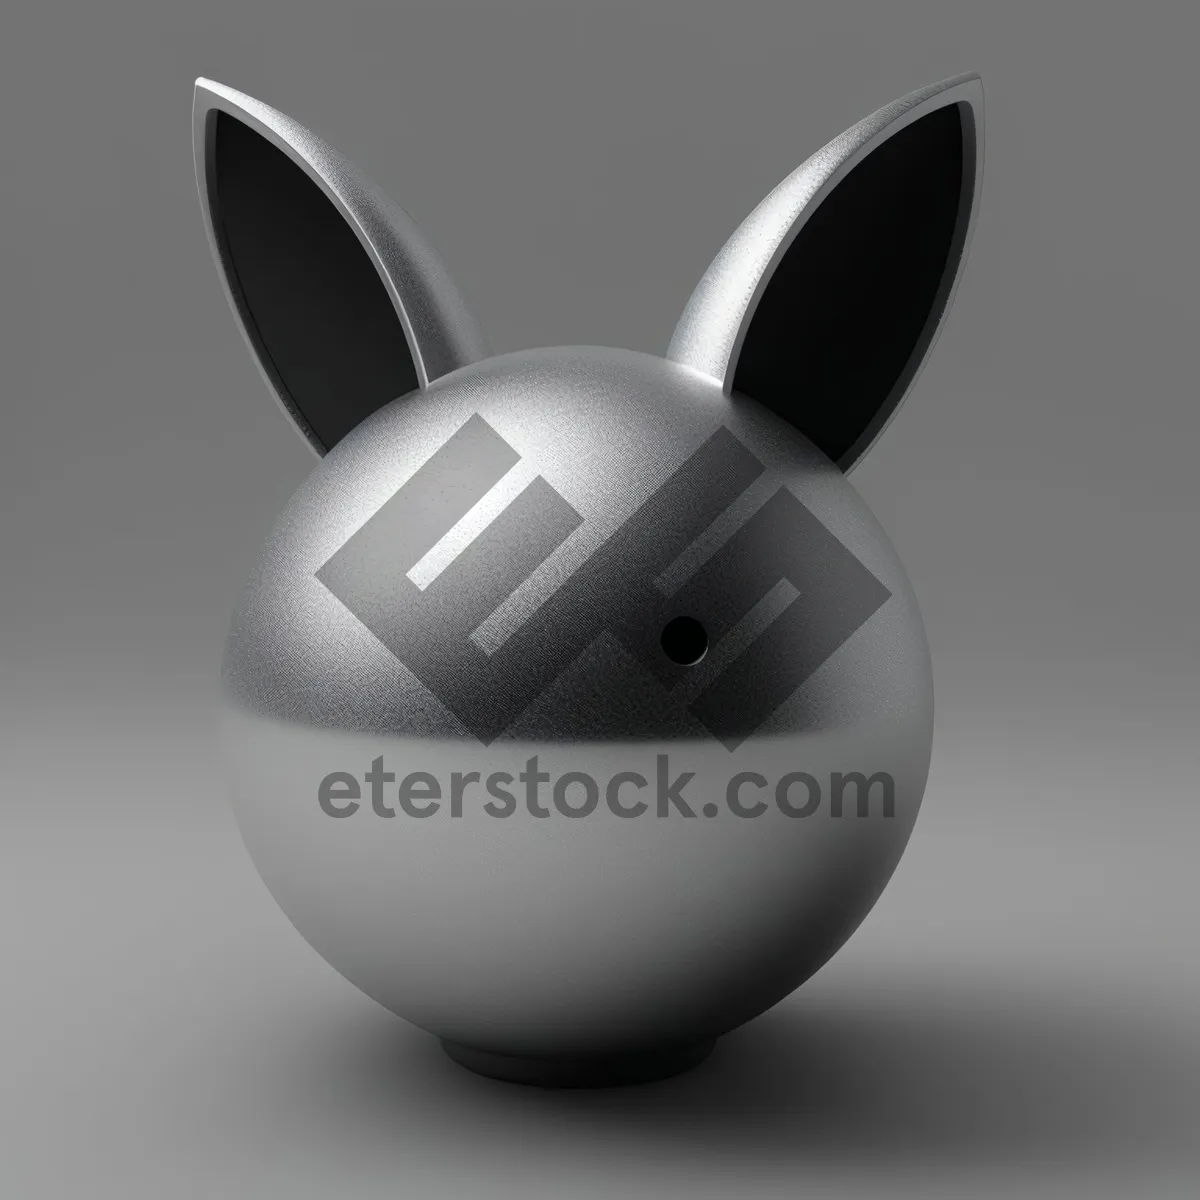 Picture of Eggcellent Kitchenware 3D Sphere Ball Image